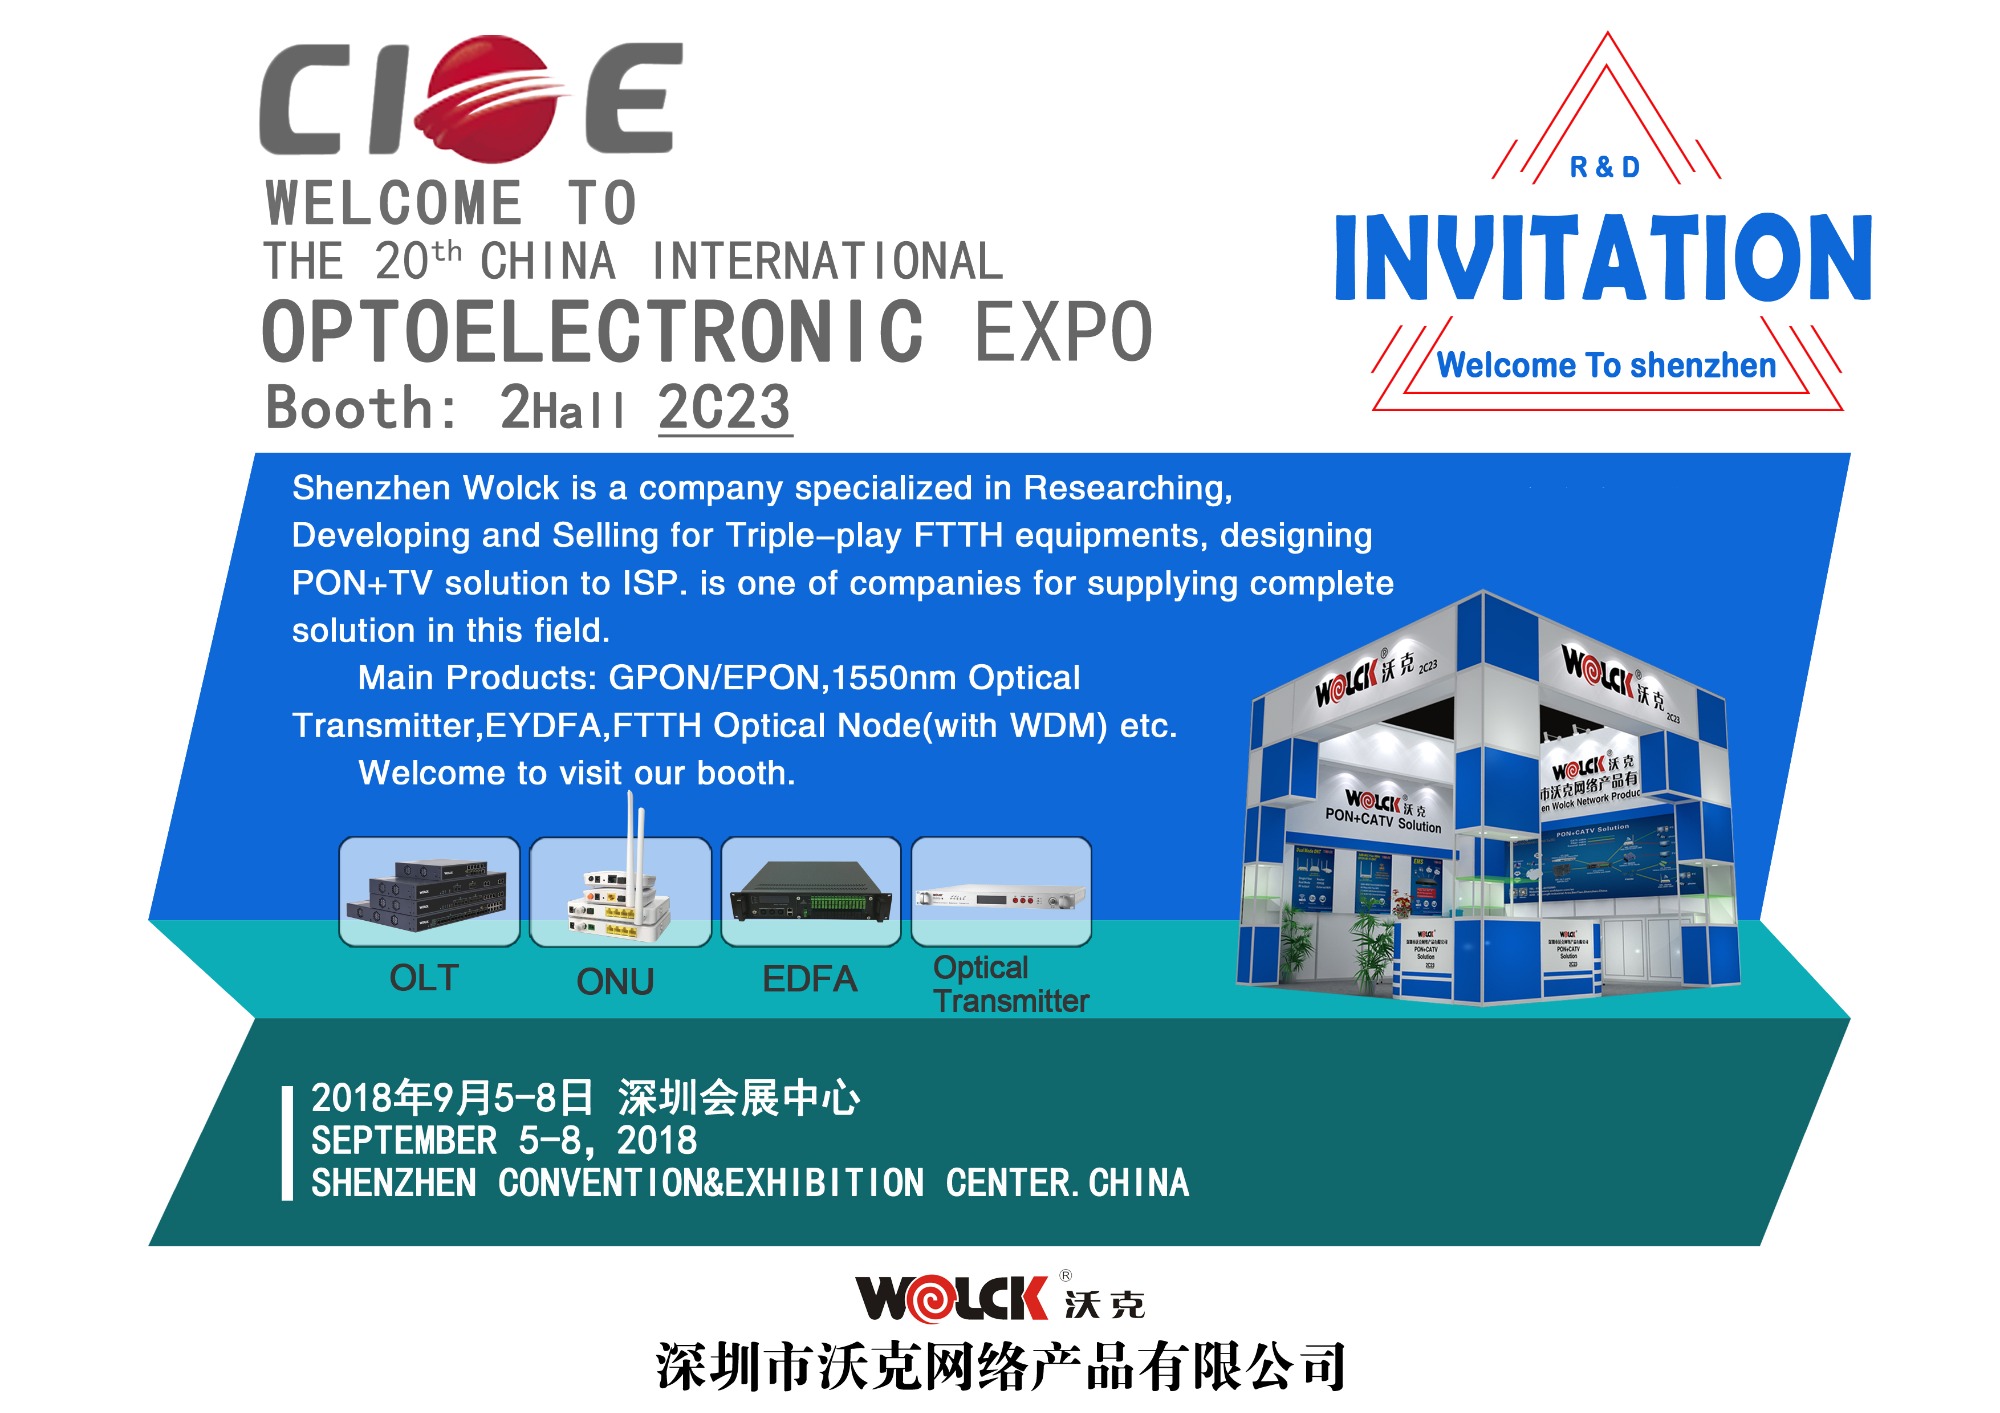 WOLCK invites you to participate in the &quot;20th China International Optoelectronic Exposition (CIOE2018)&quot;